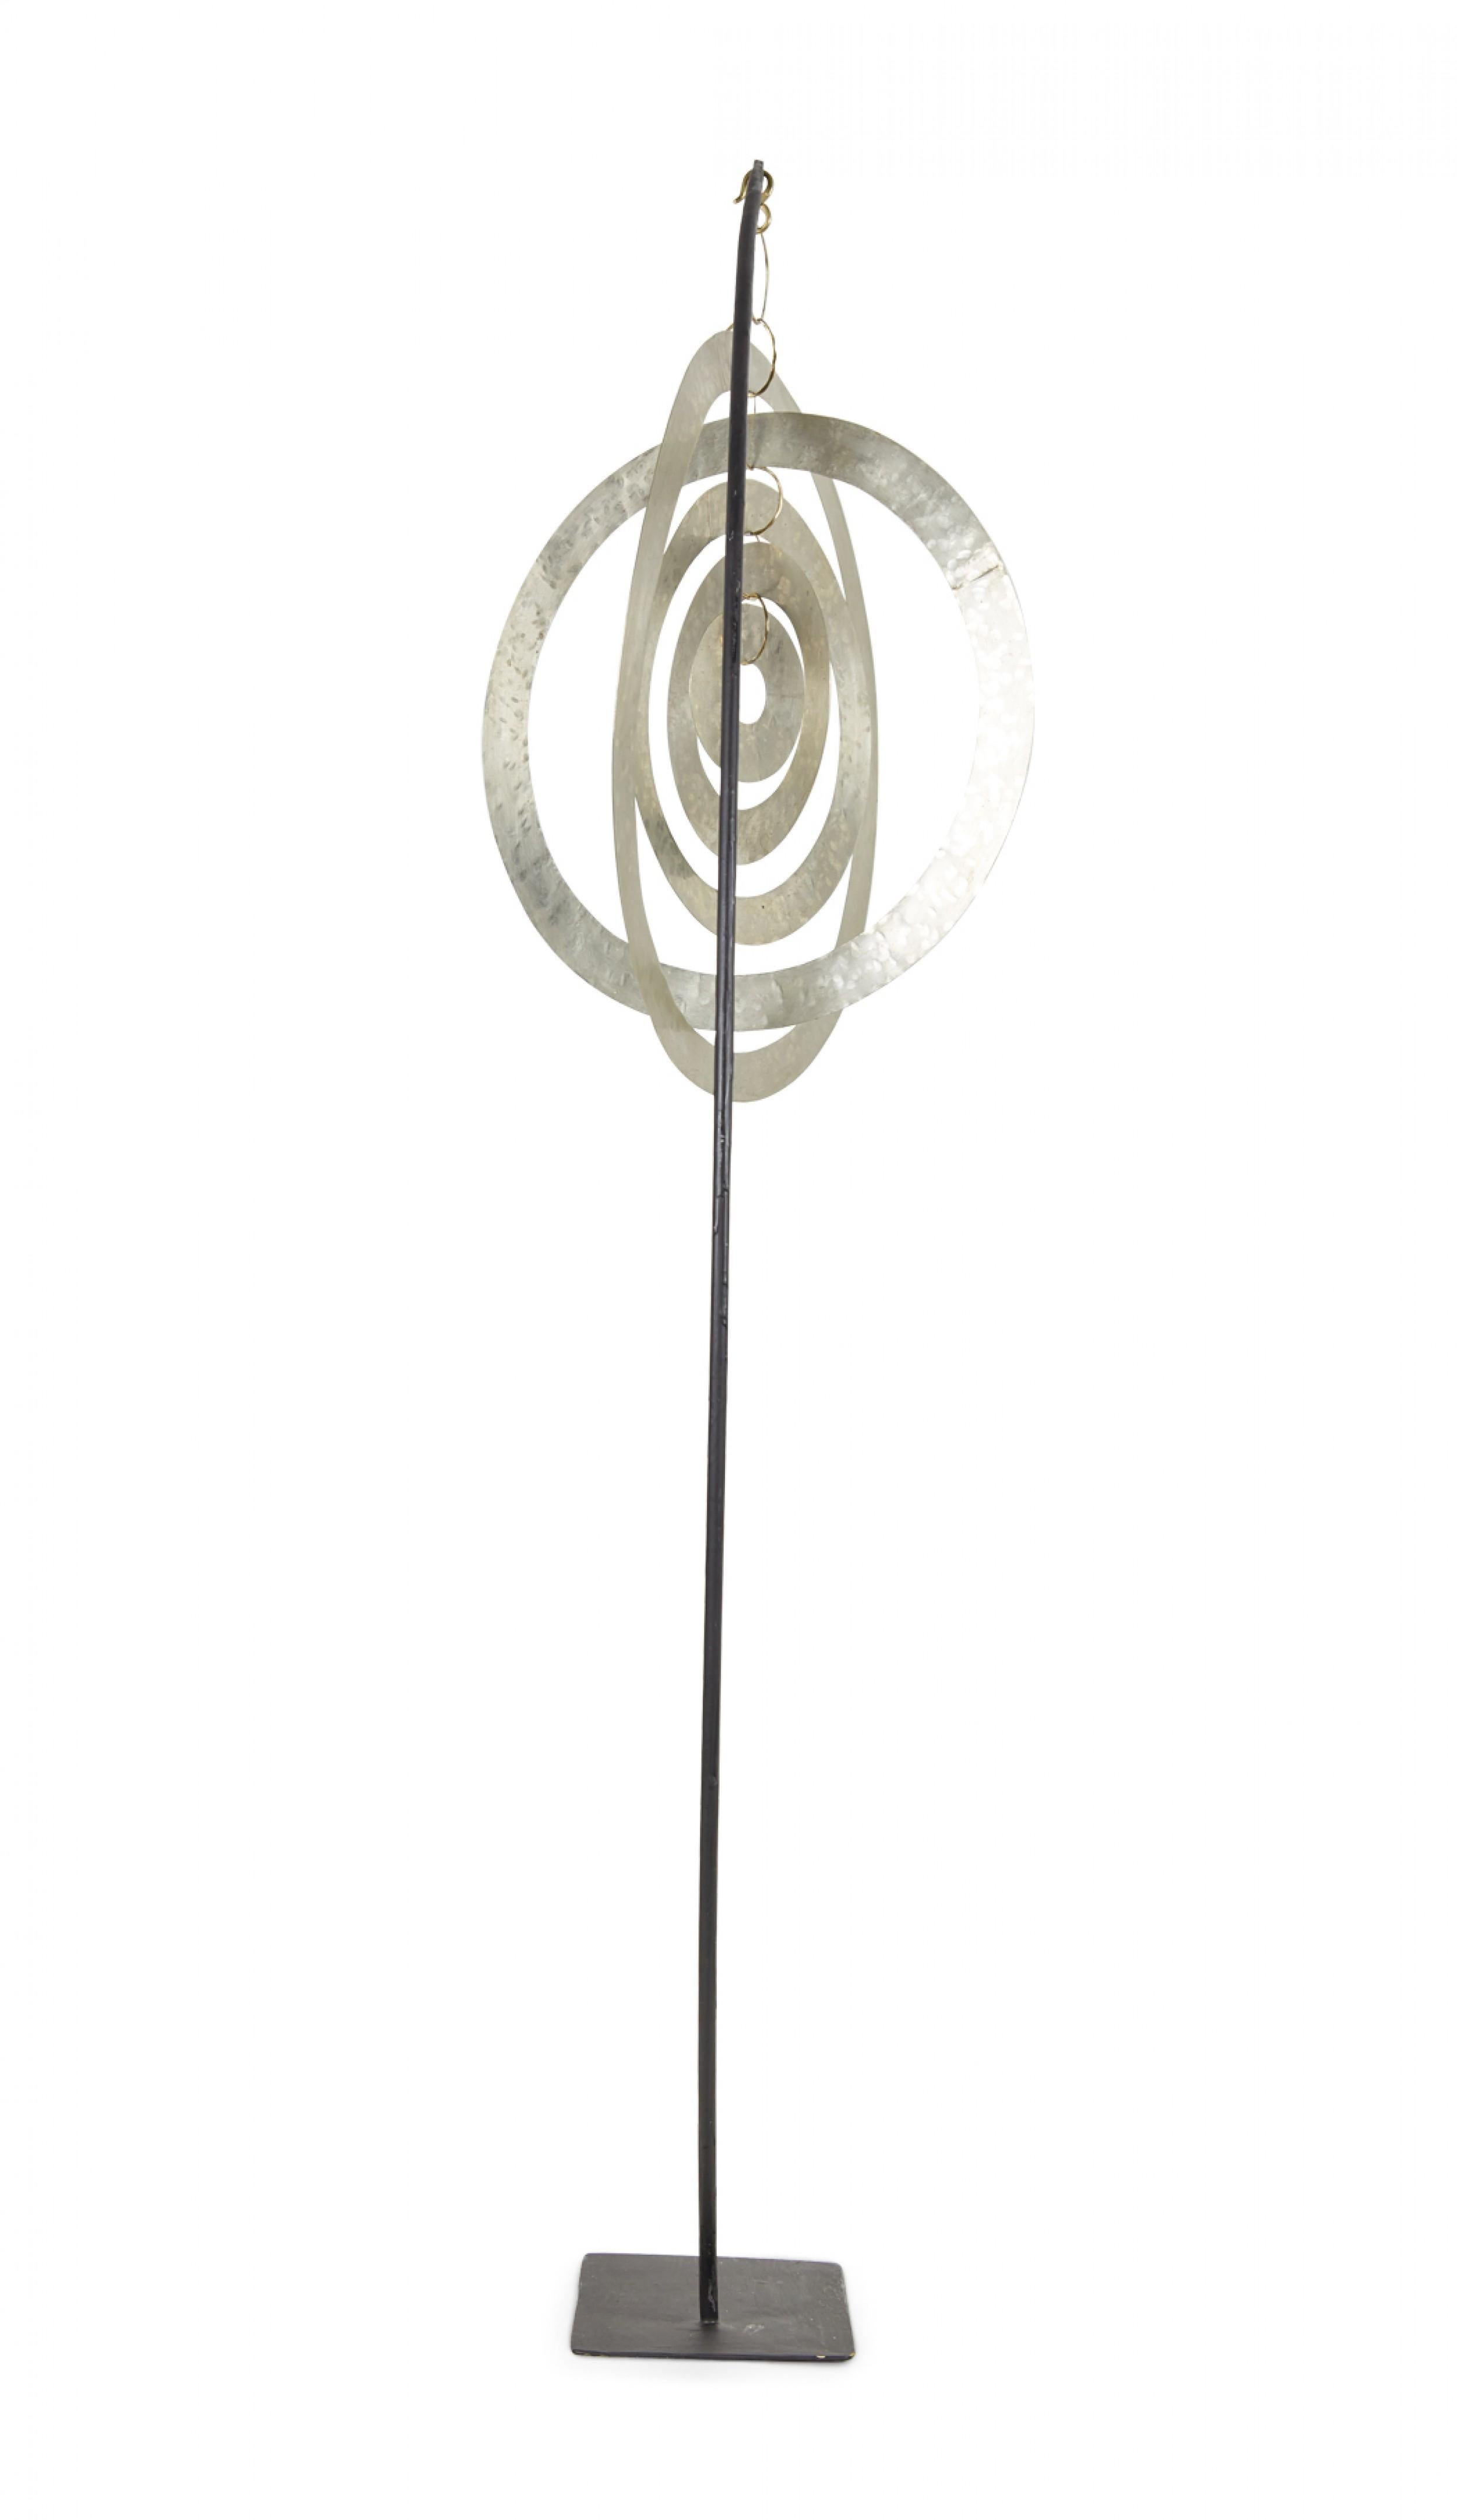 Contemporary Abstract Hammered Nickel Orbital Sculpture Suspended on a Metal Mou In Good Condition For Sale In New York, NY